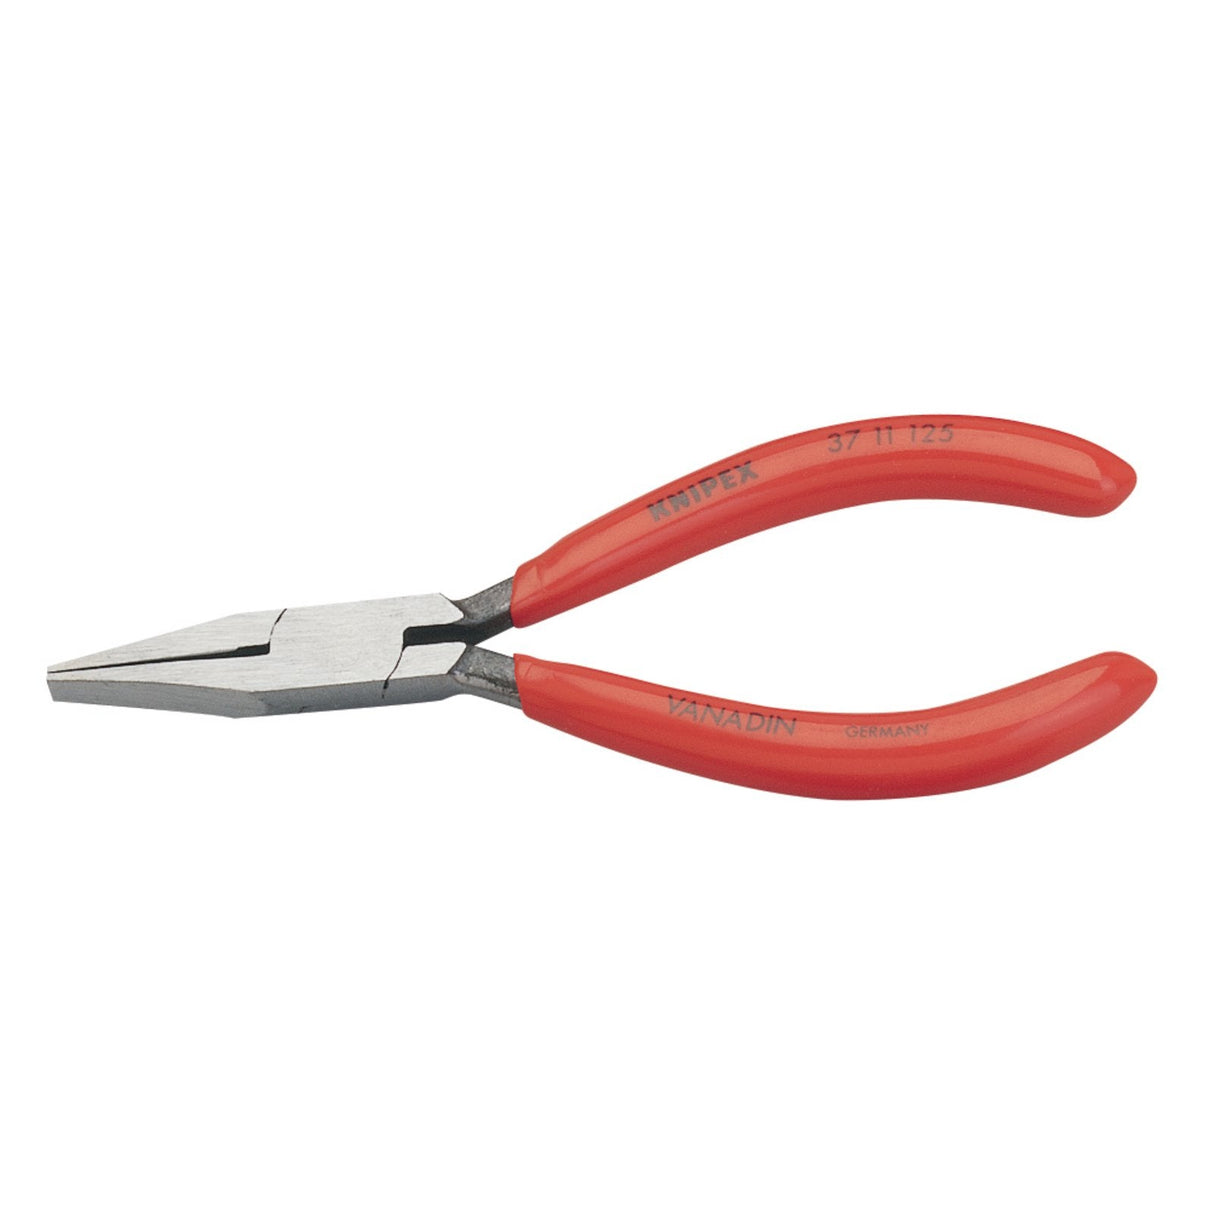 Draper Knipex 37 11 125 Watchmakers Or Relay Adjusting Pliers, 125mm - 37 11 125 - Farming Parts